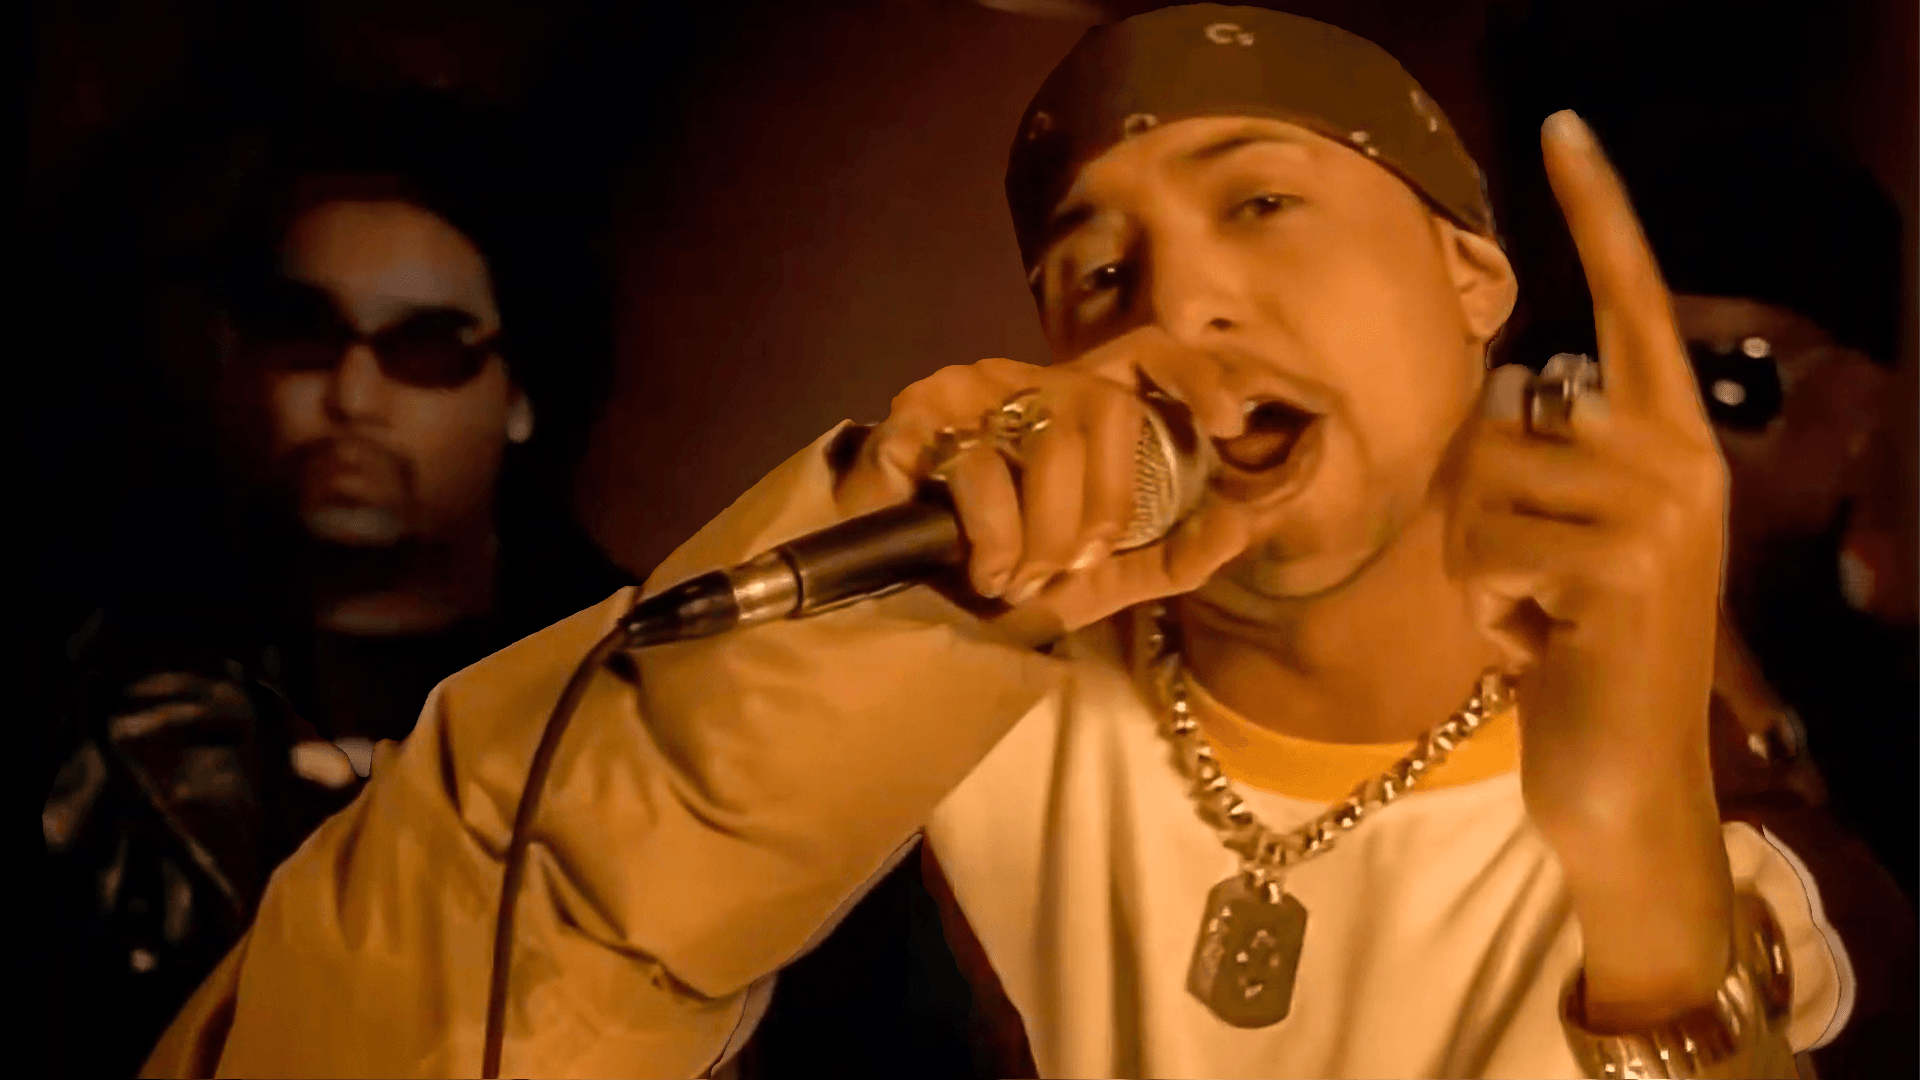 The Story Of Sean Paul's 'Get Busy' - VICE Video: Documentaries, Films,  News Videos